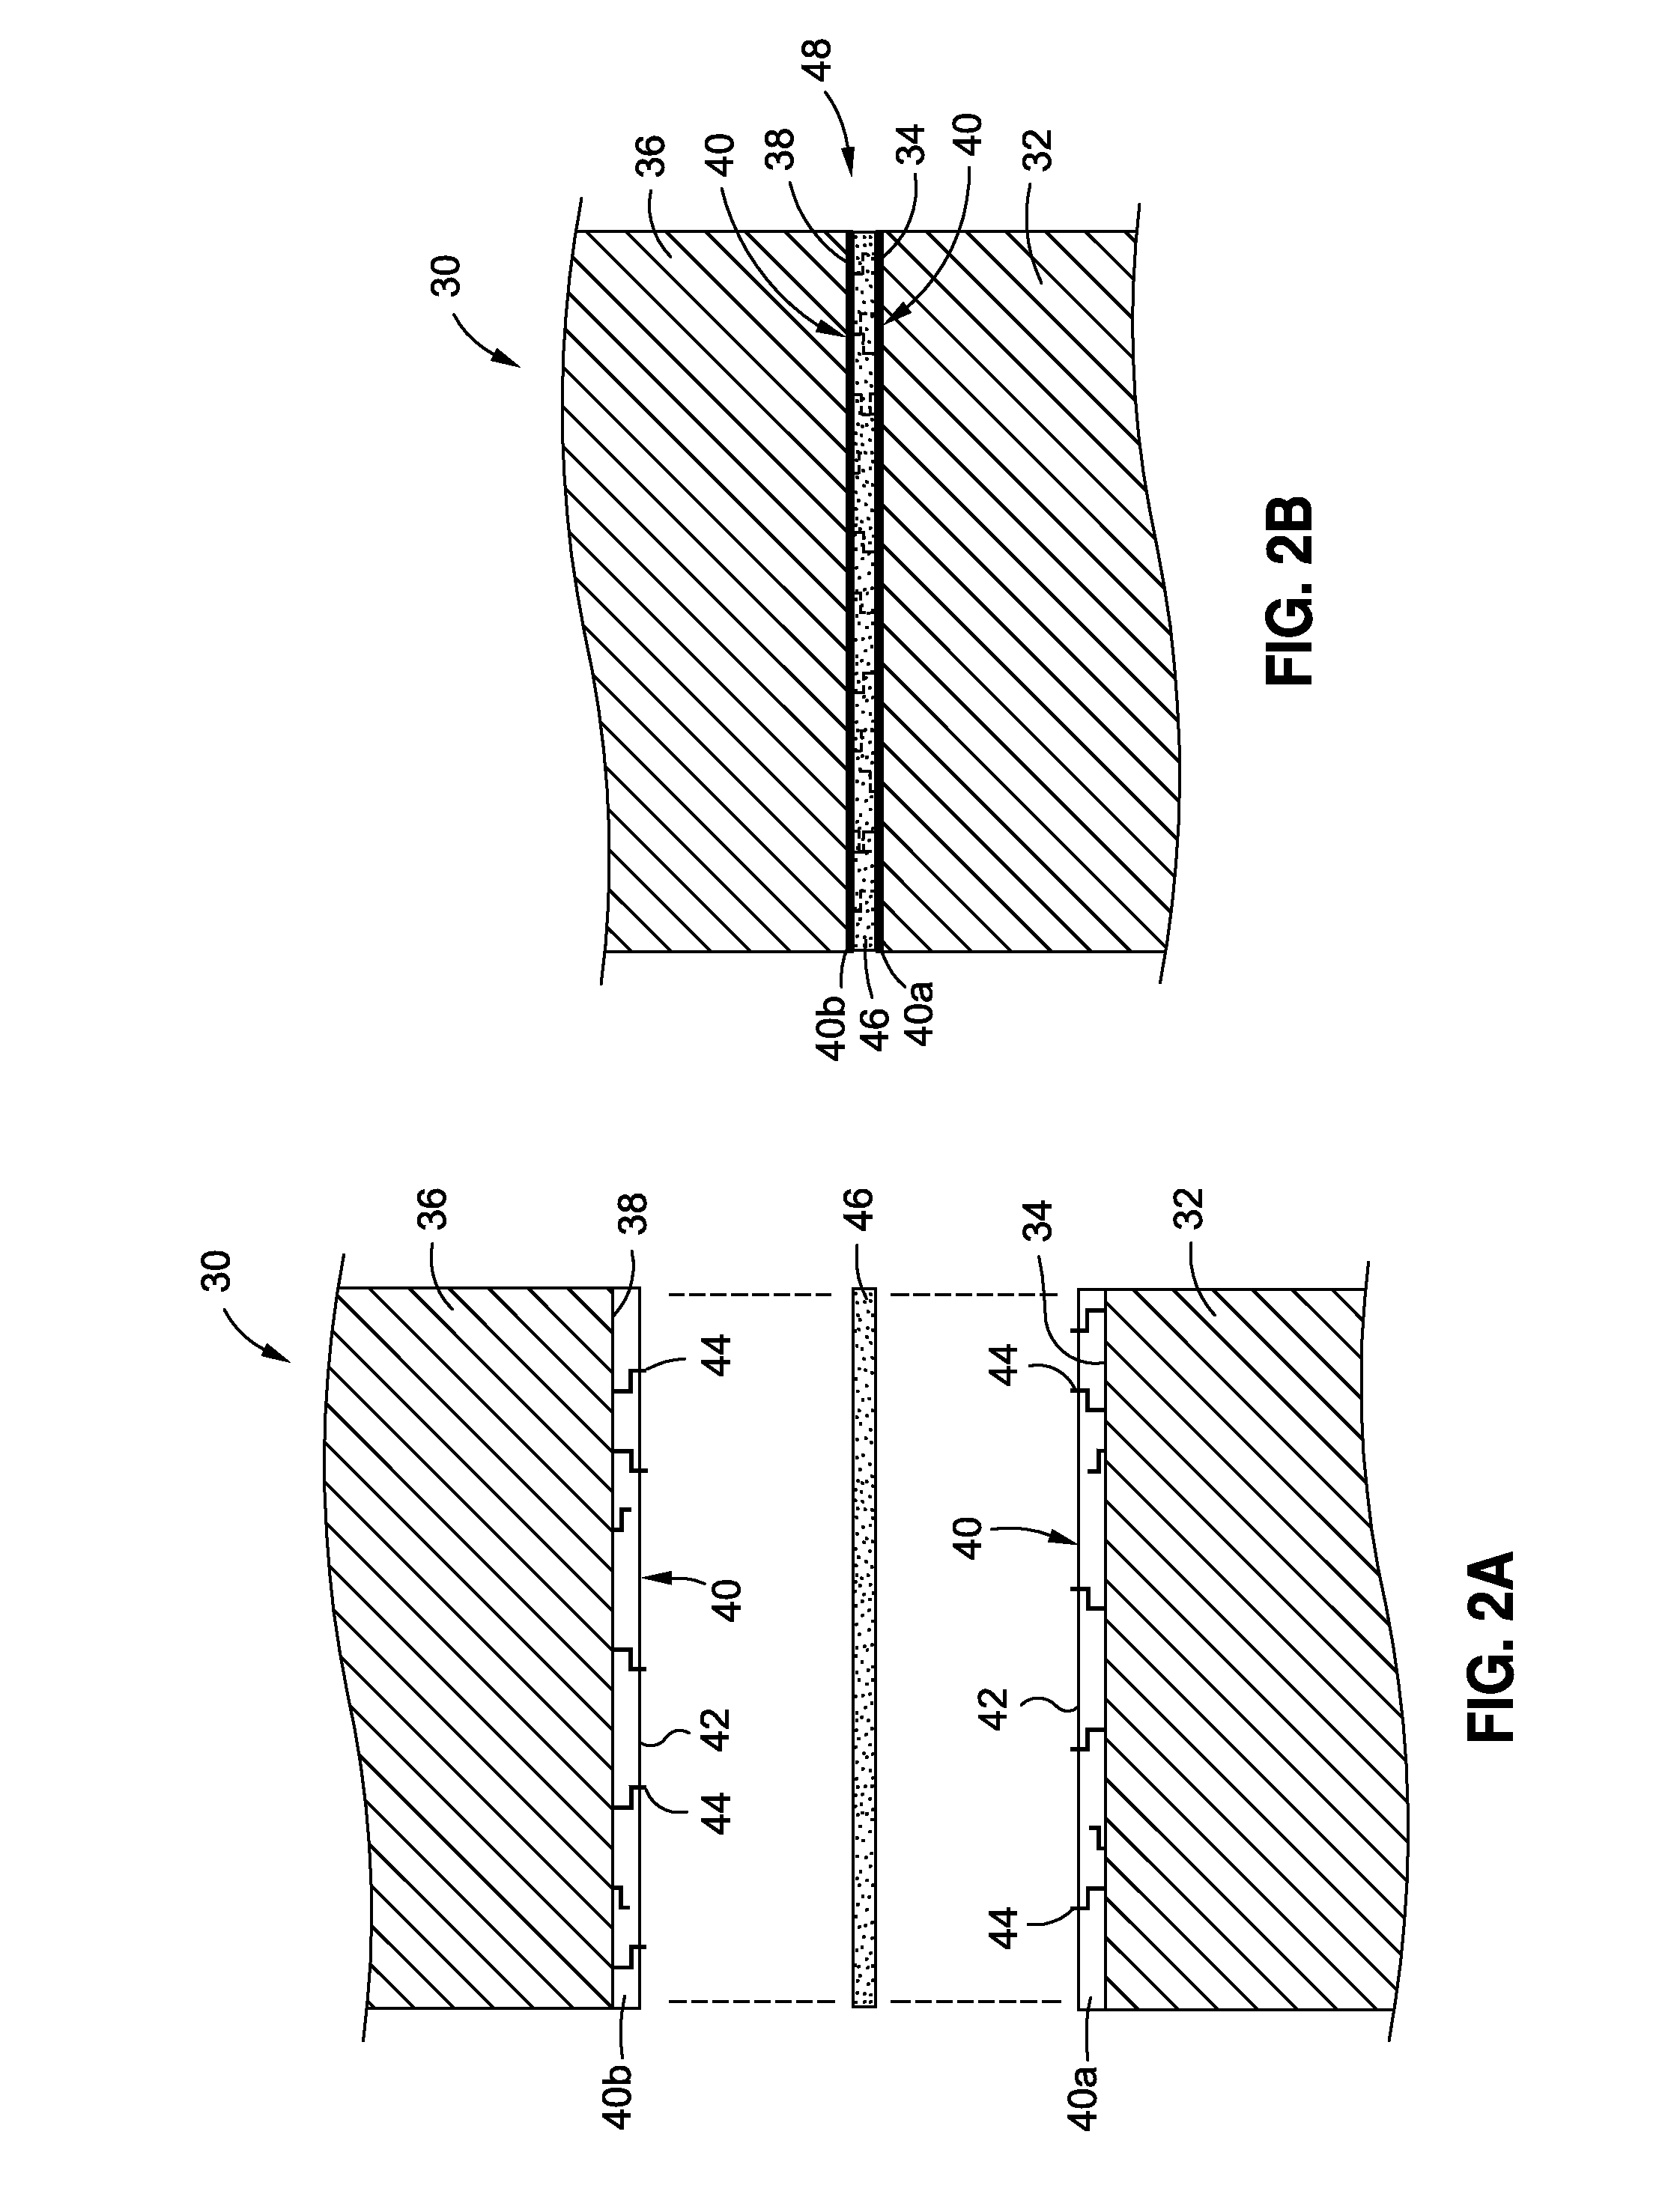 High temperature hybridized molecular functional group adhesion barrier coating and method